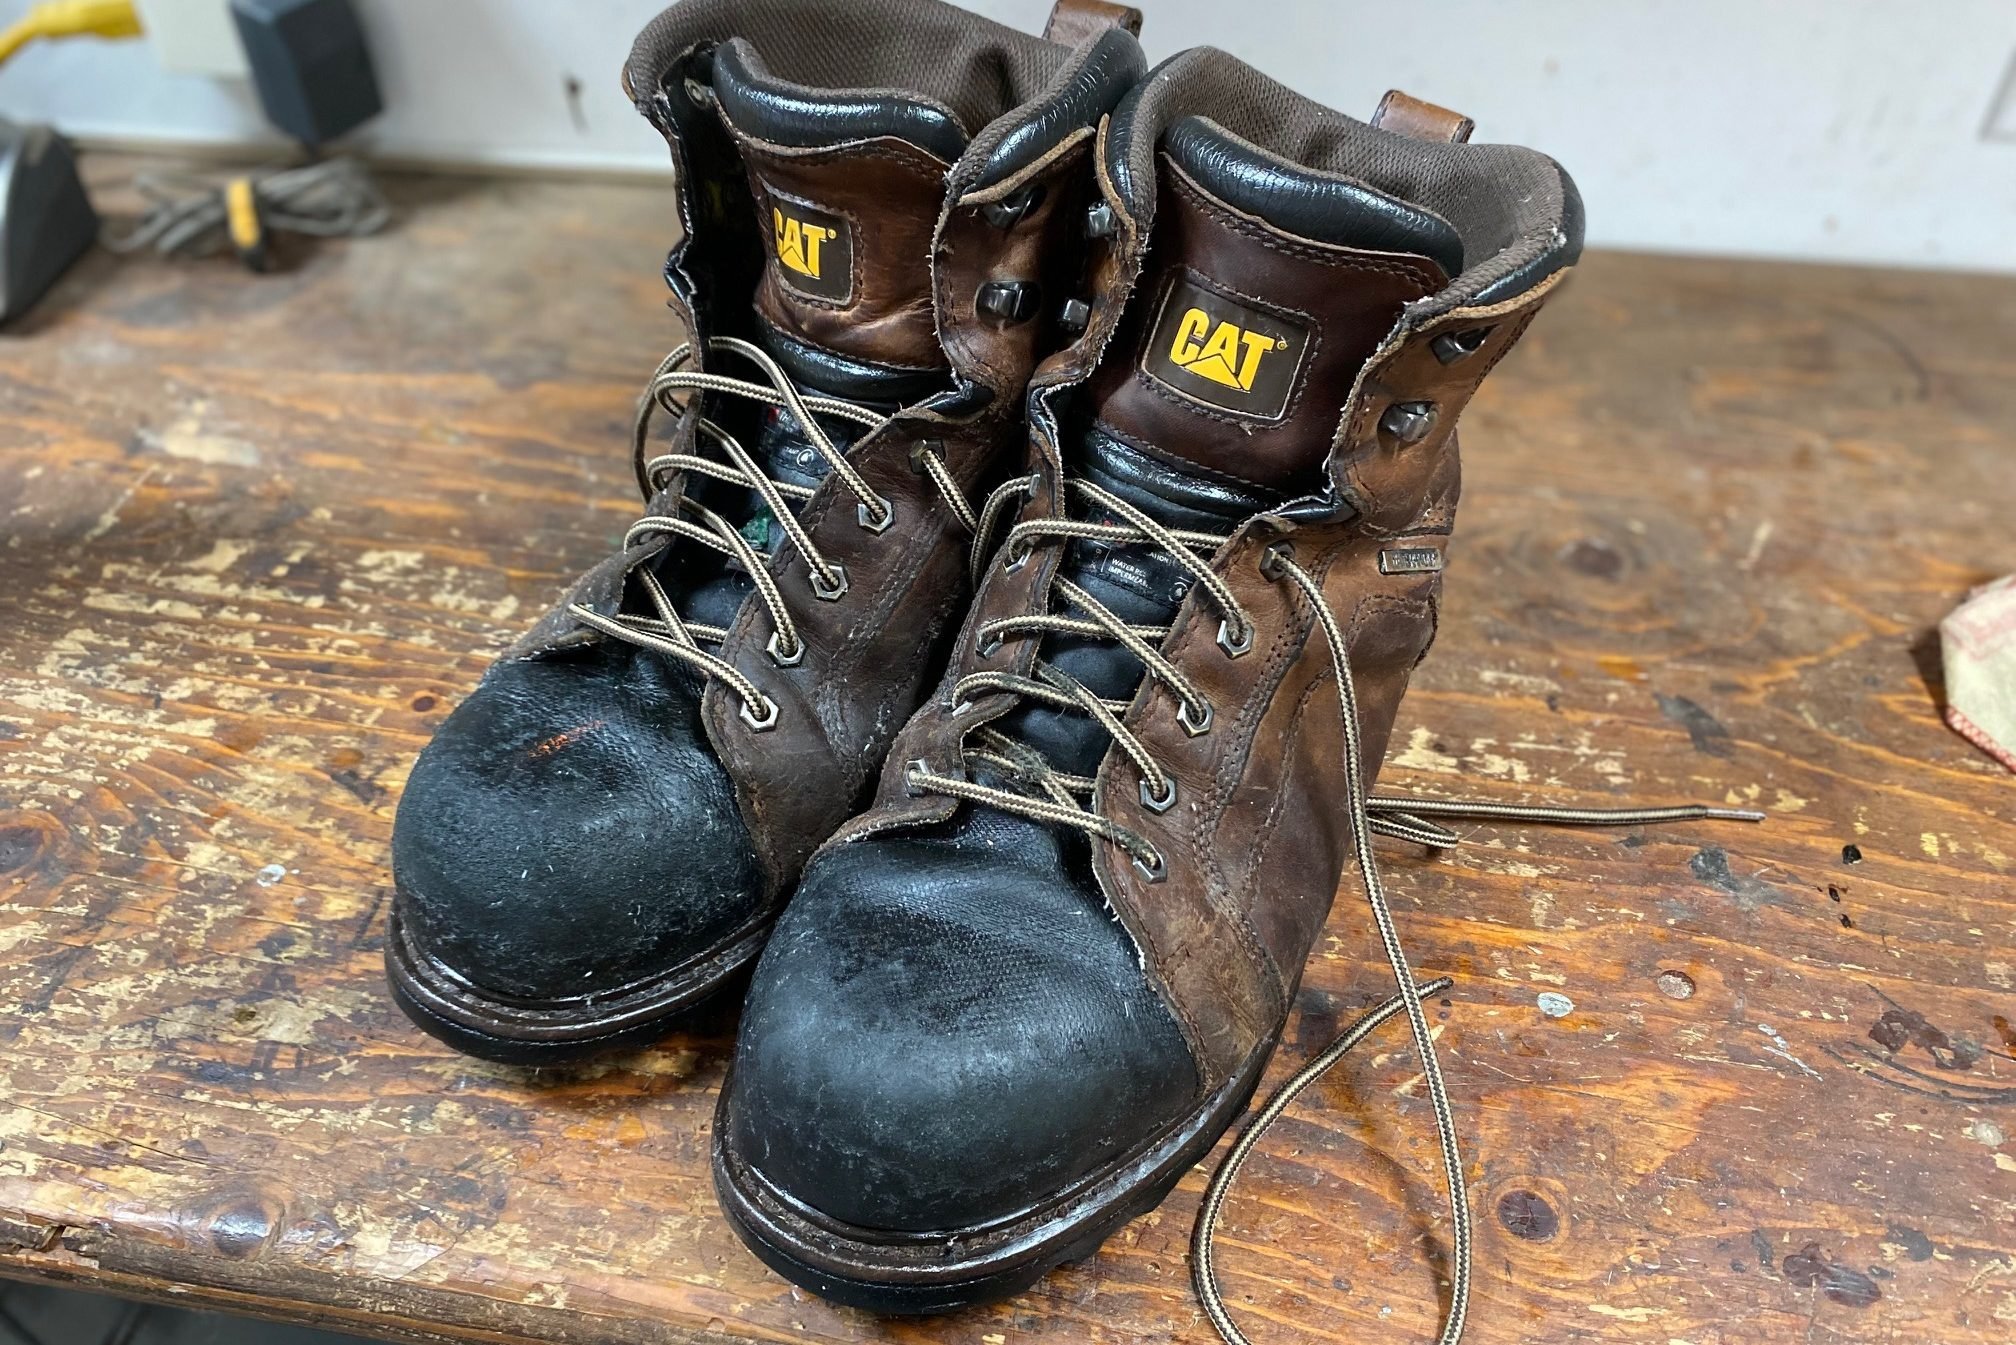 How To Care for Your Leather Work Boots in the Winter